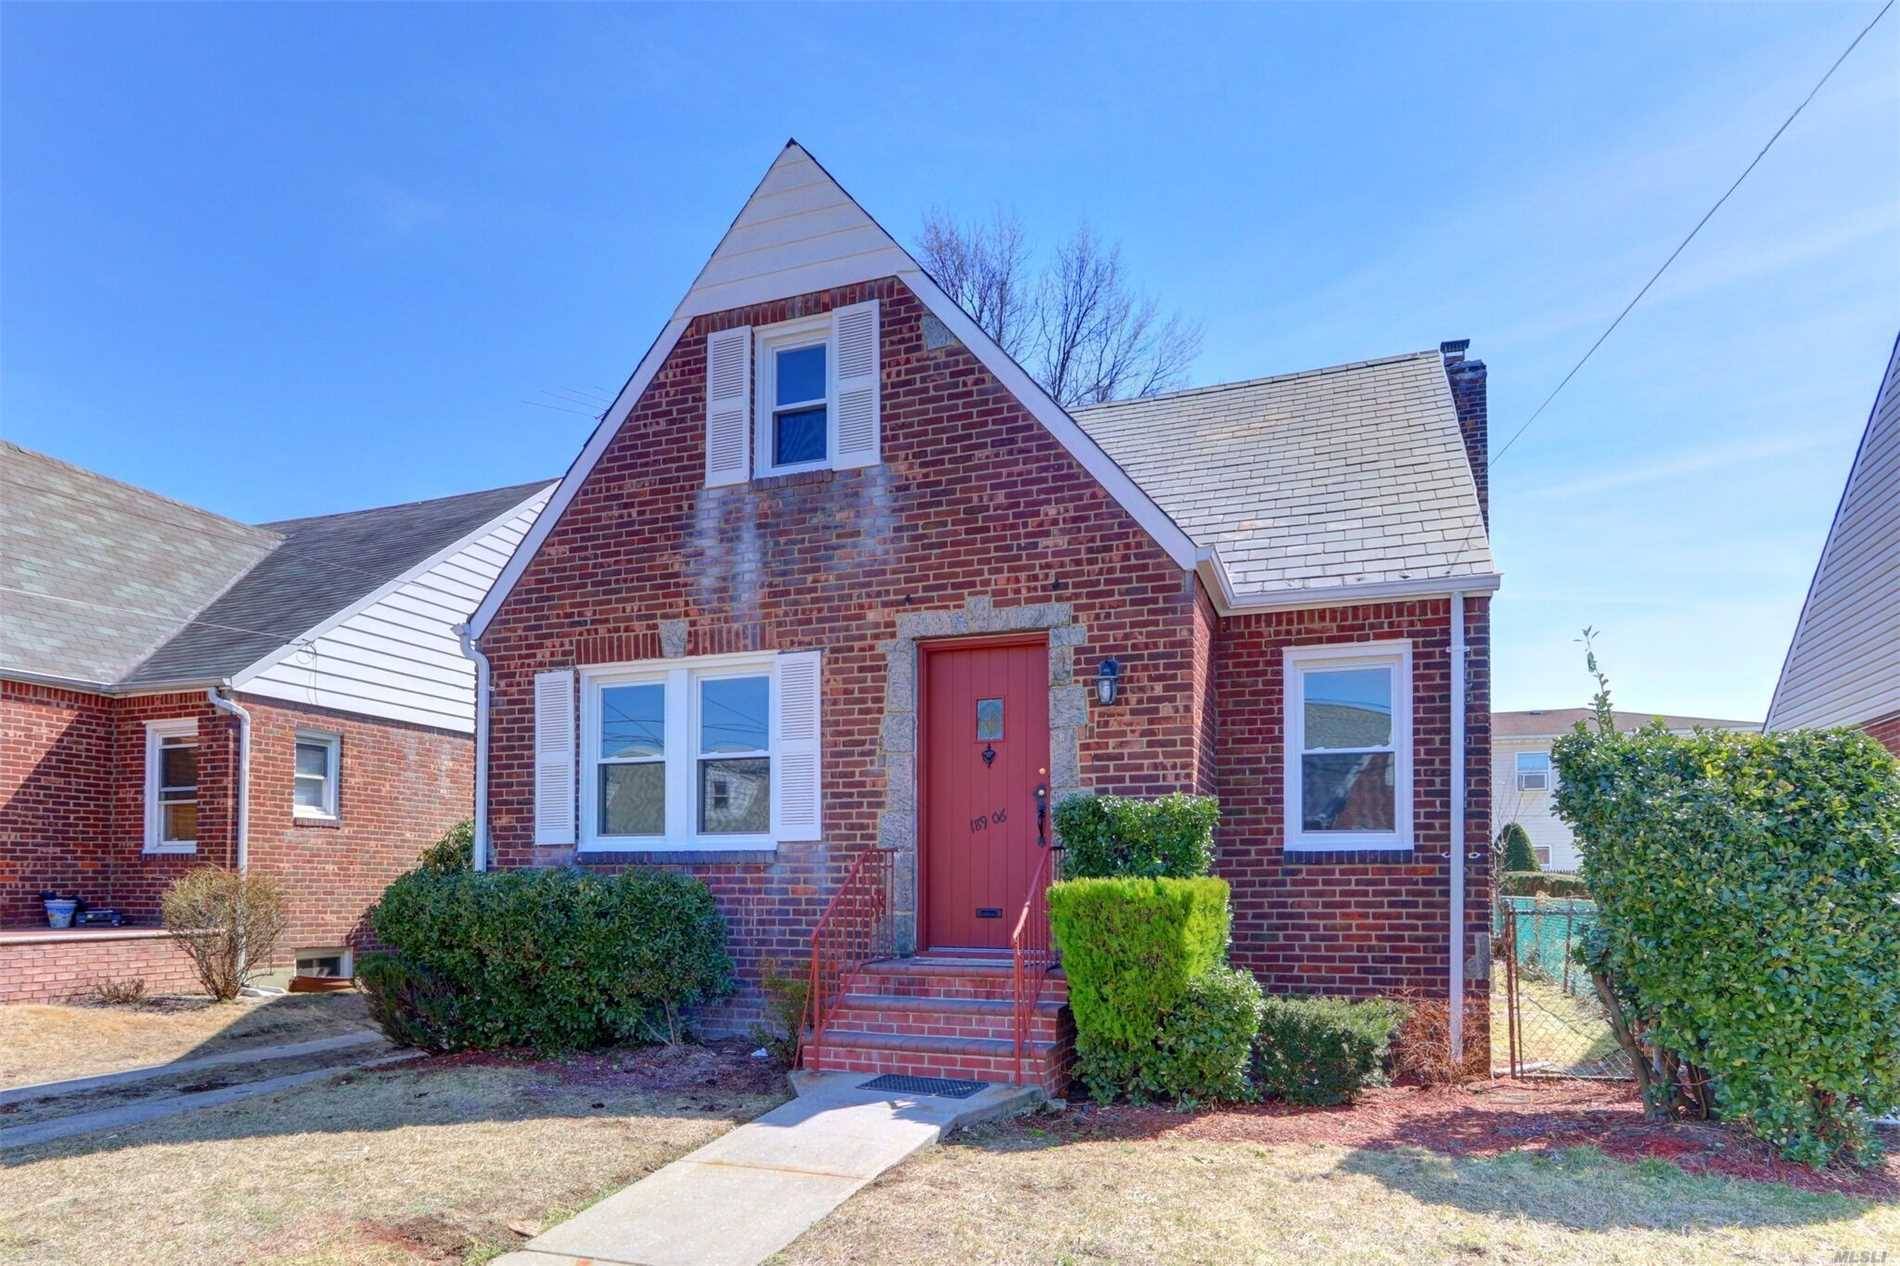 100 Brick home, gorgeous renovated home stainless appliances granite counter tops.